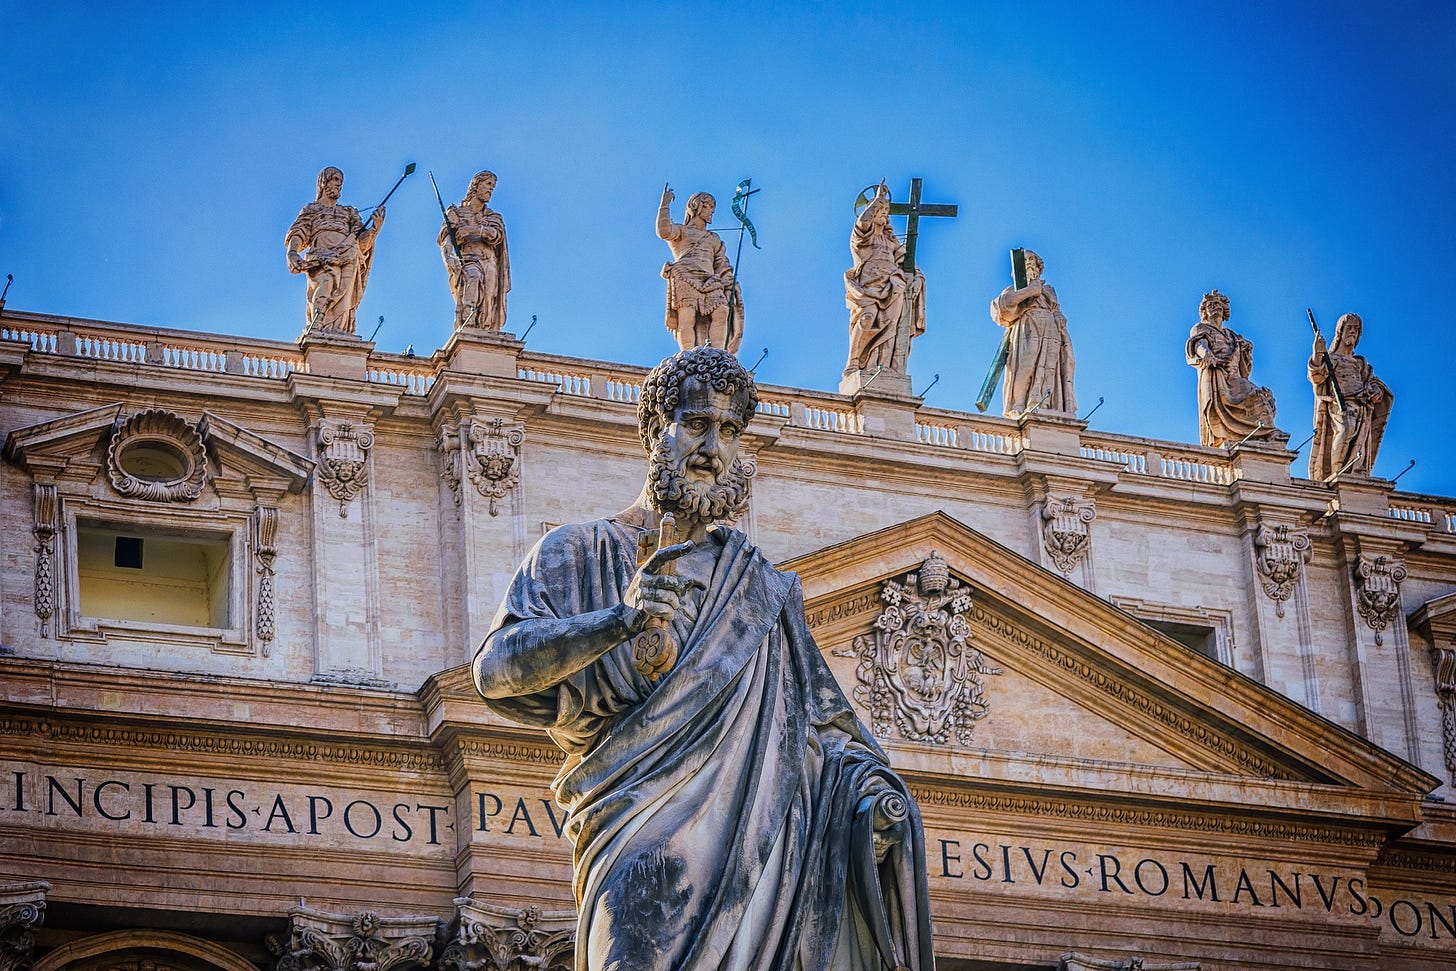 A statue of the apostle Peter in Rome.